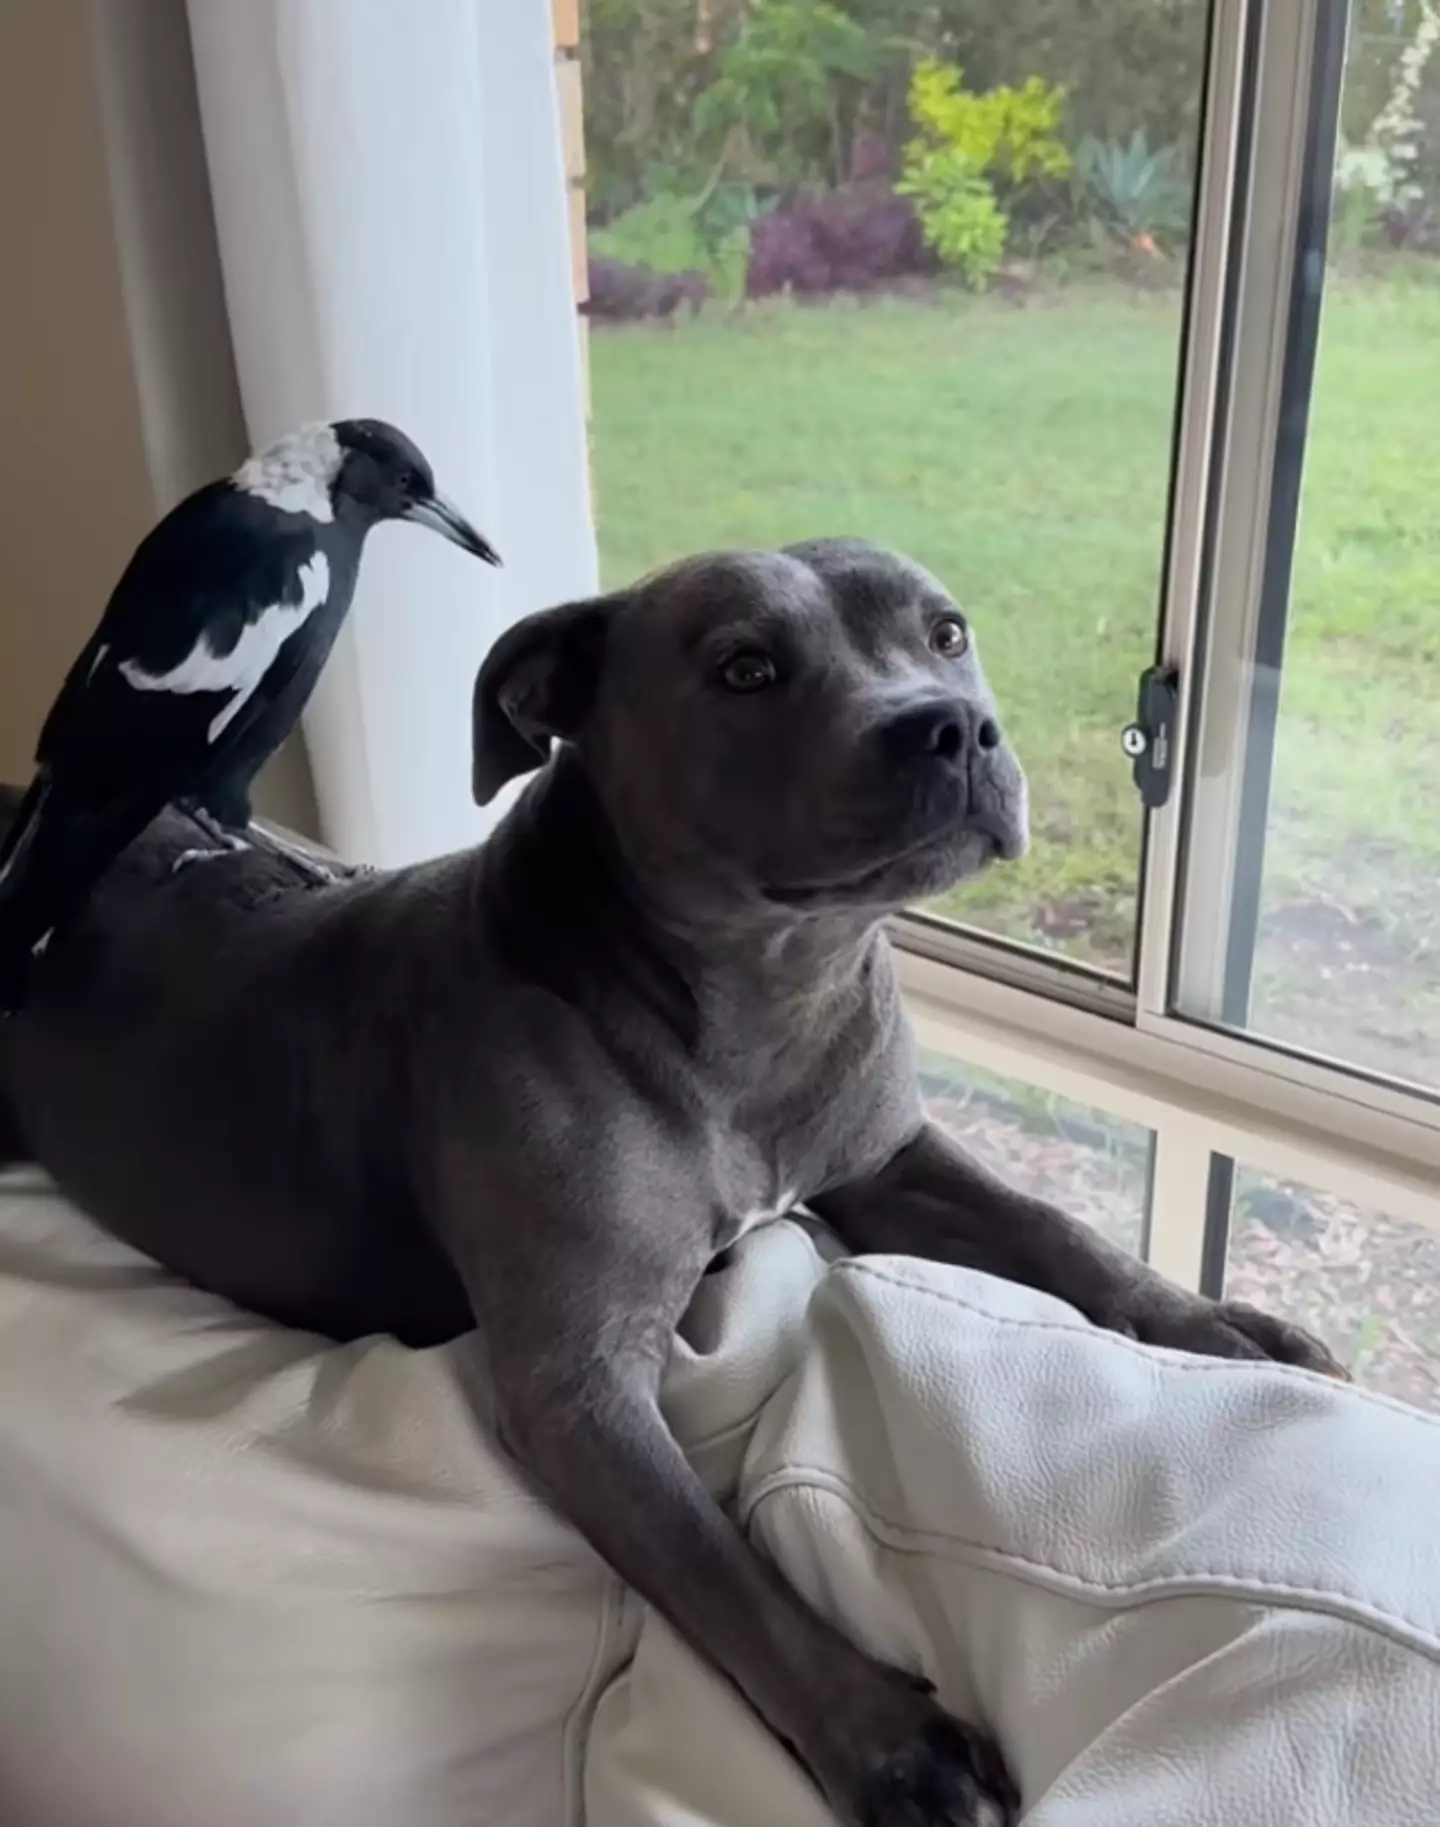 Molly the magpie and Peggy the staffy are best friends. (Instagram/@peggyandmolly)